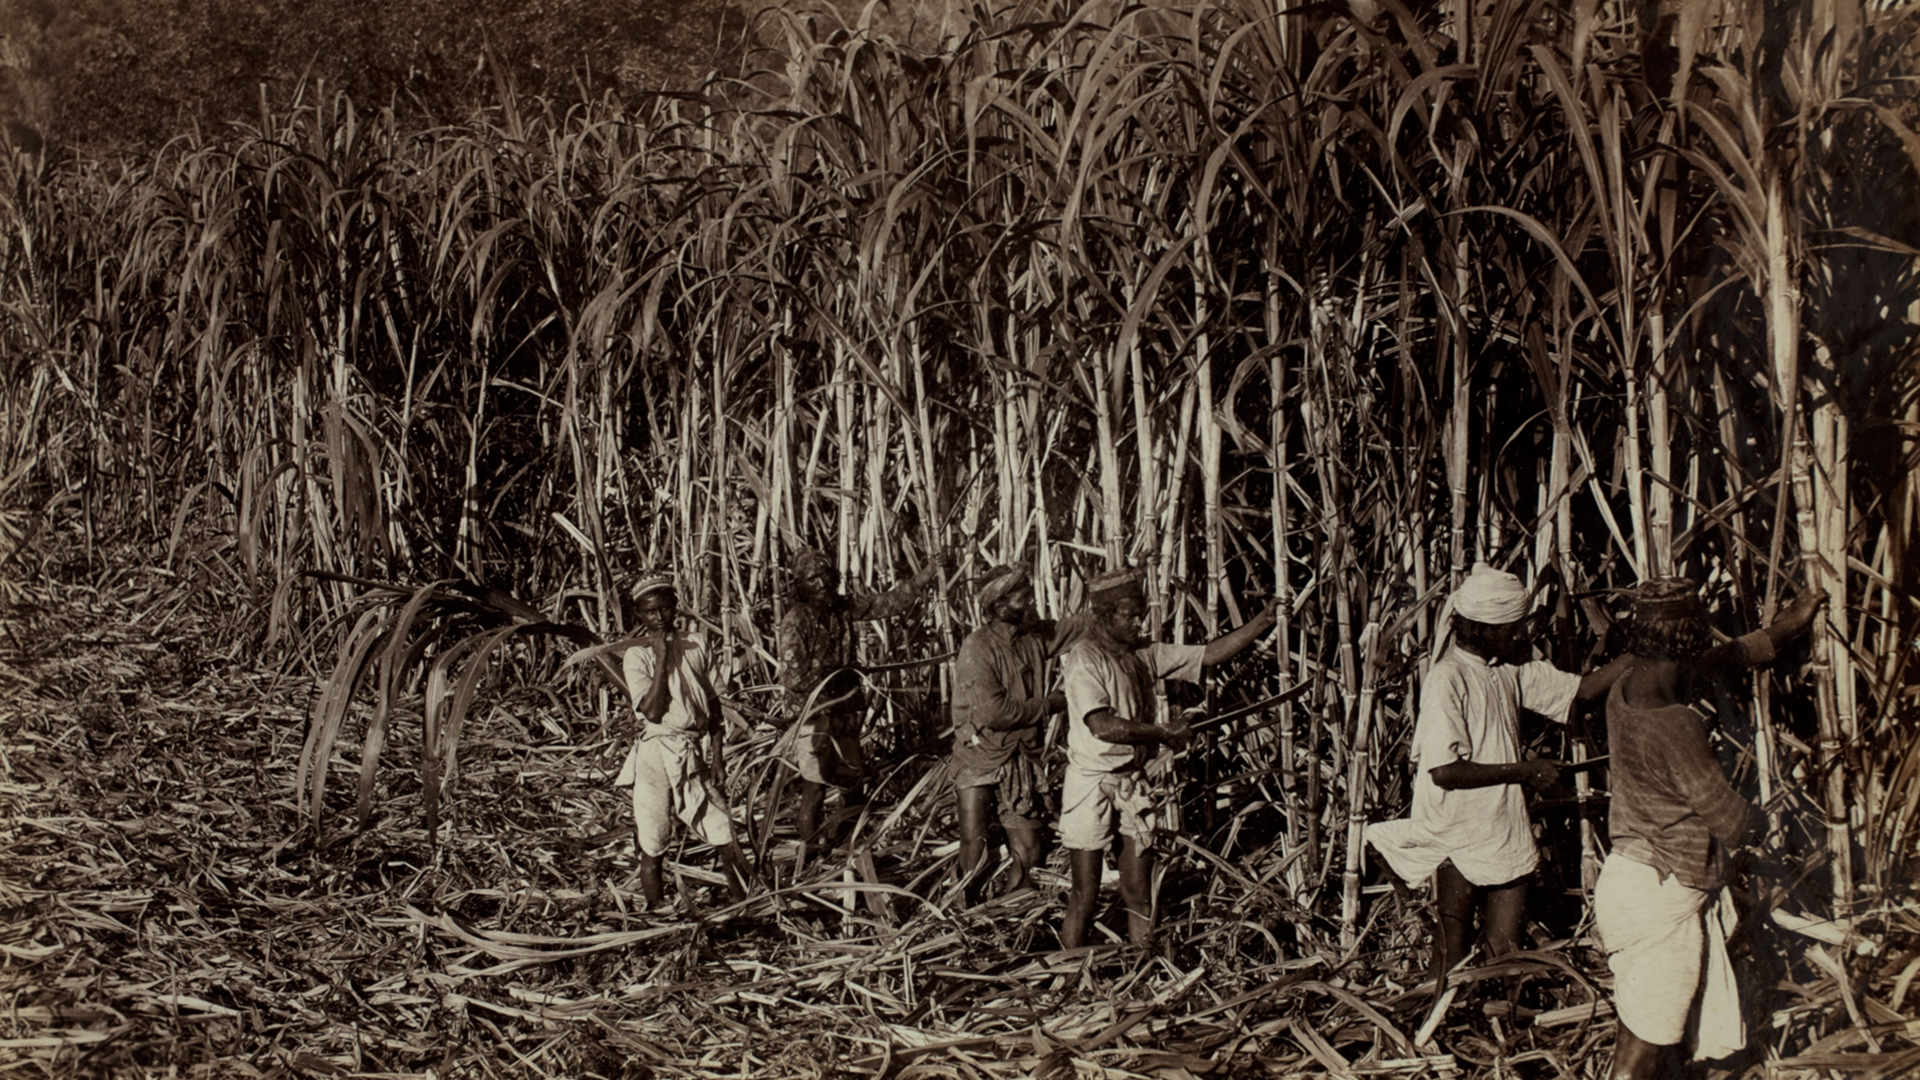 <p>Imperially displaced, landless farmers from British India are shipped to Natal Colony to work on the sugar plantations. Their descendants comprise a large proportion of today’s South African Indian community.</p>